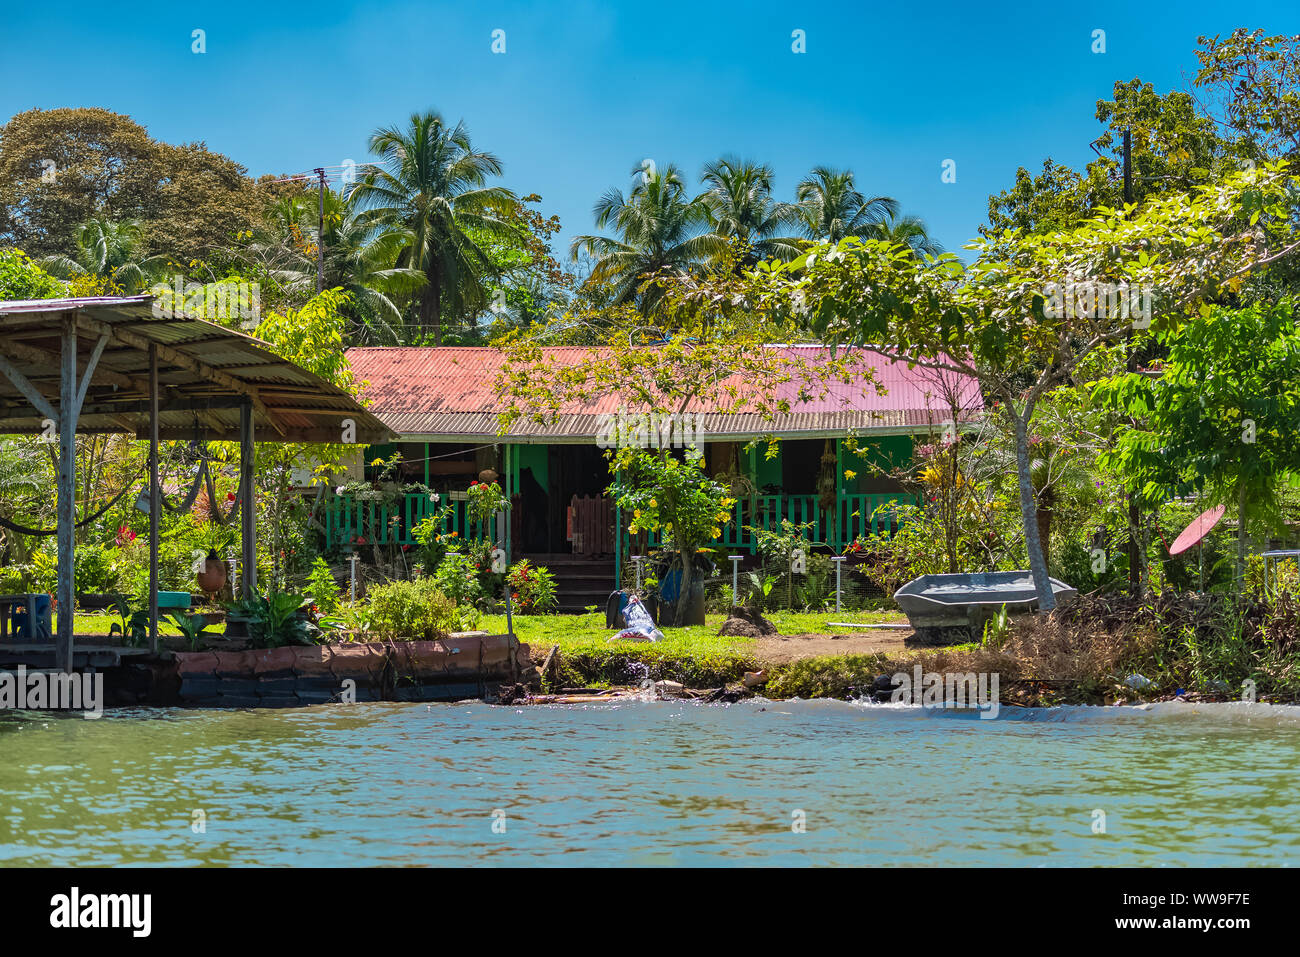 Costa Rica, typical house on the river, in Tortuguero, wildlife in the mangrove Stock Photo